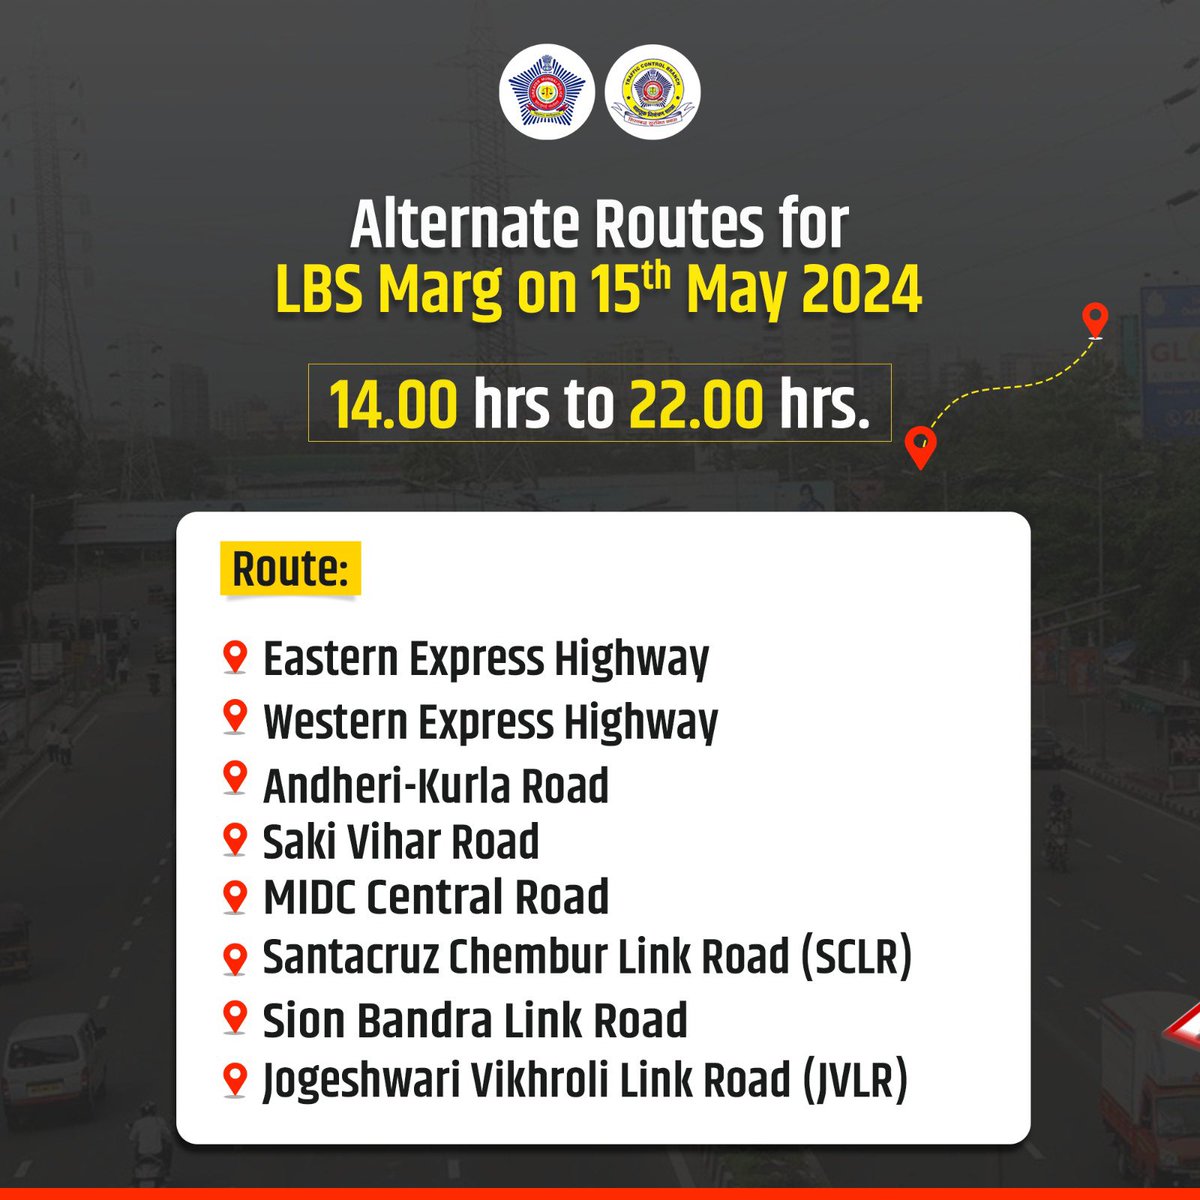 In view of the Road Show organised at LBS Road on 15th May 2024, large number of individuals are expected to participate in it. Therefore in order to ease the traffic on the adjoining roads, the following traffic arrangements will be in place. #MTPTrafficUpdates